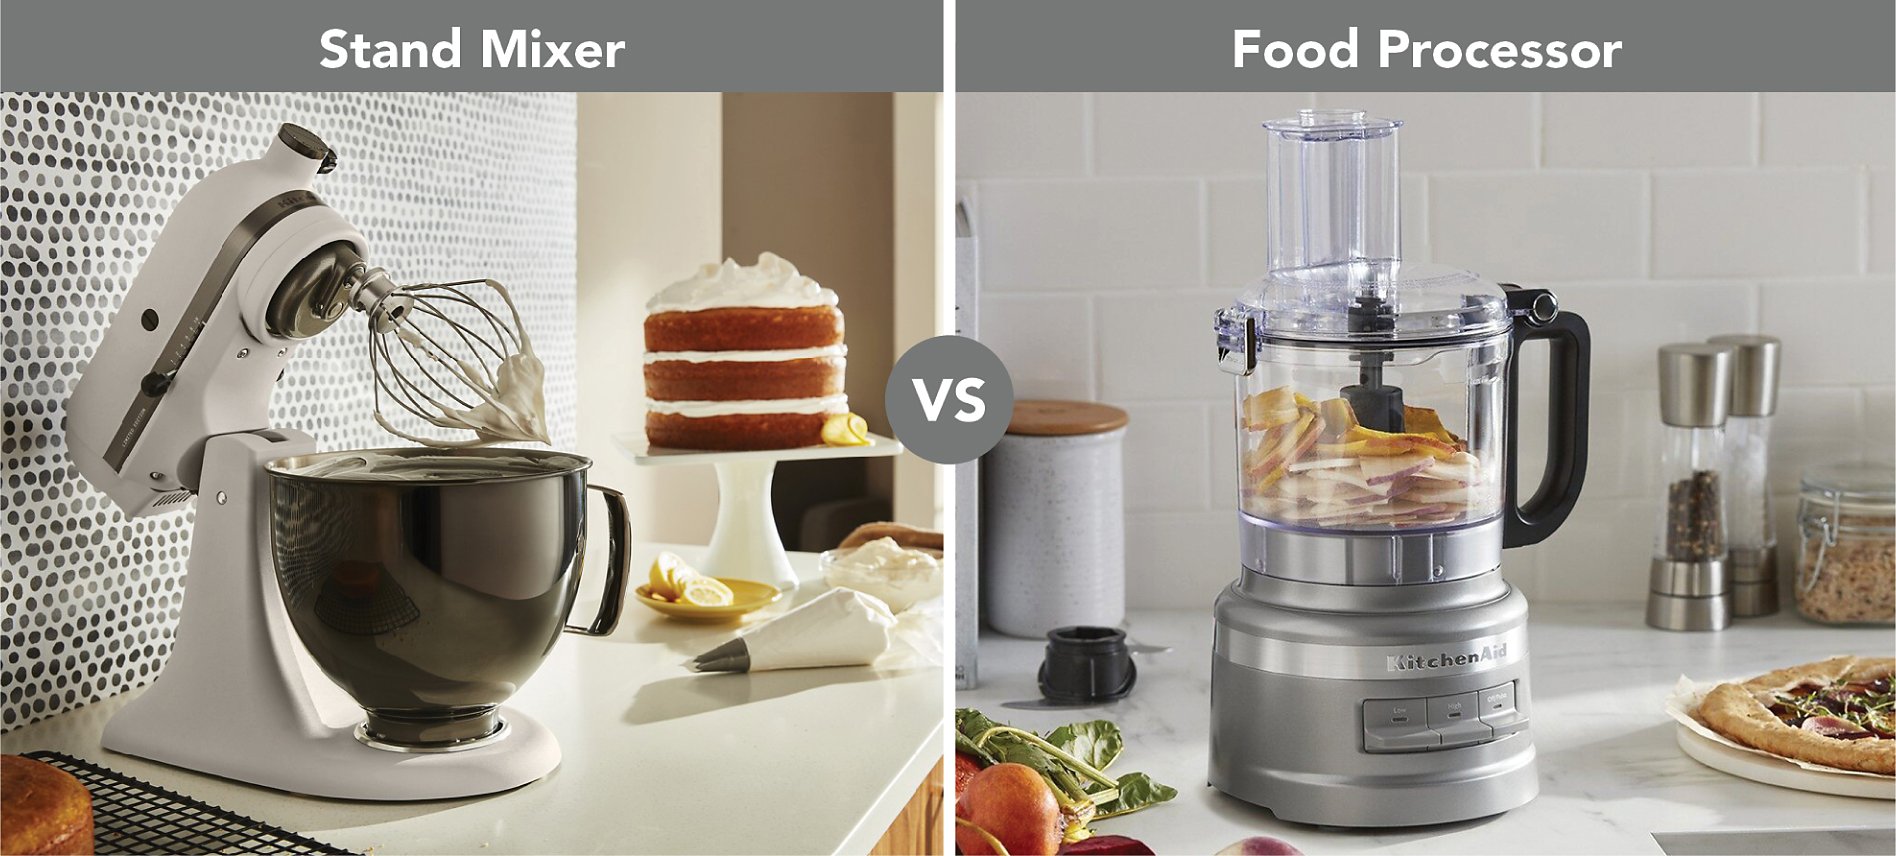 At blokere den første Bil Food Processor vs. Mixer: What's the Difference? | KitchenAid